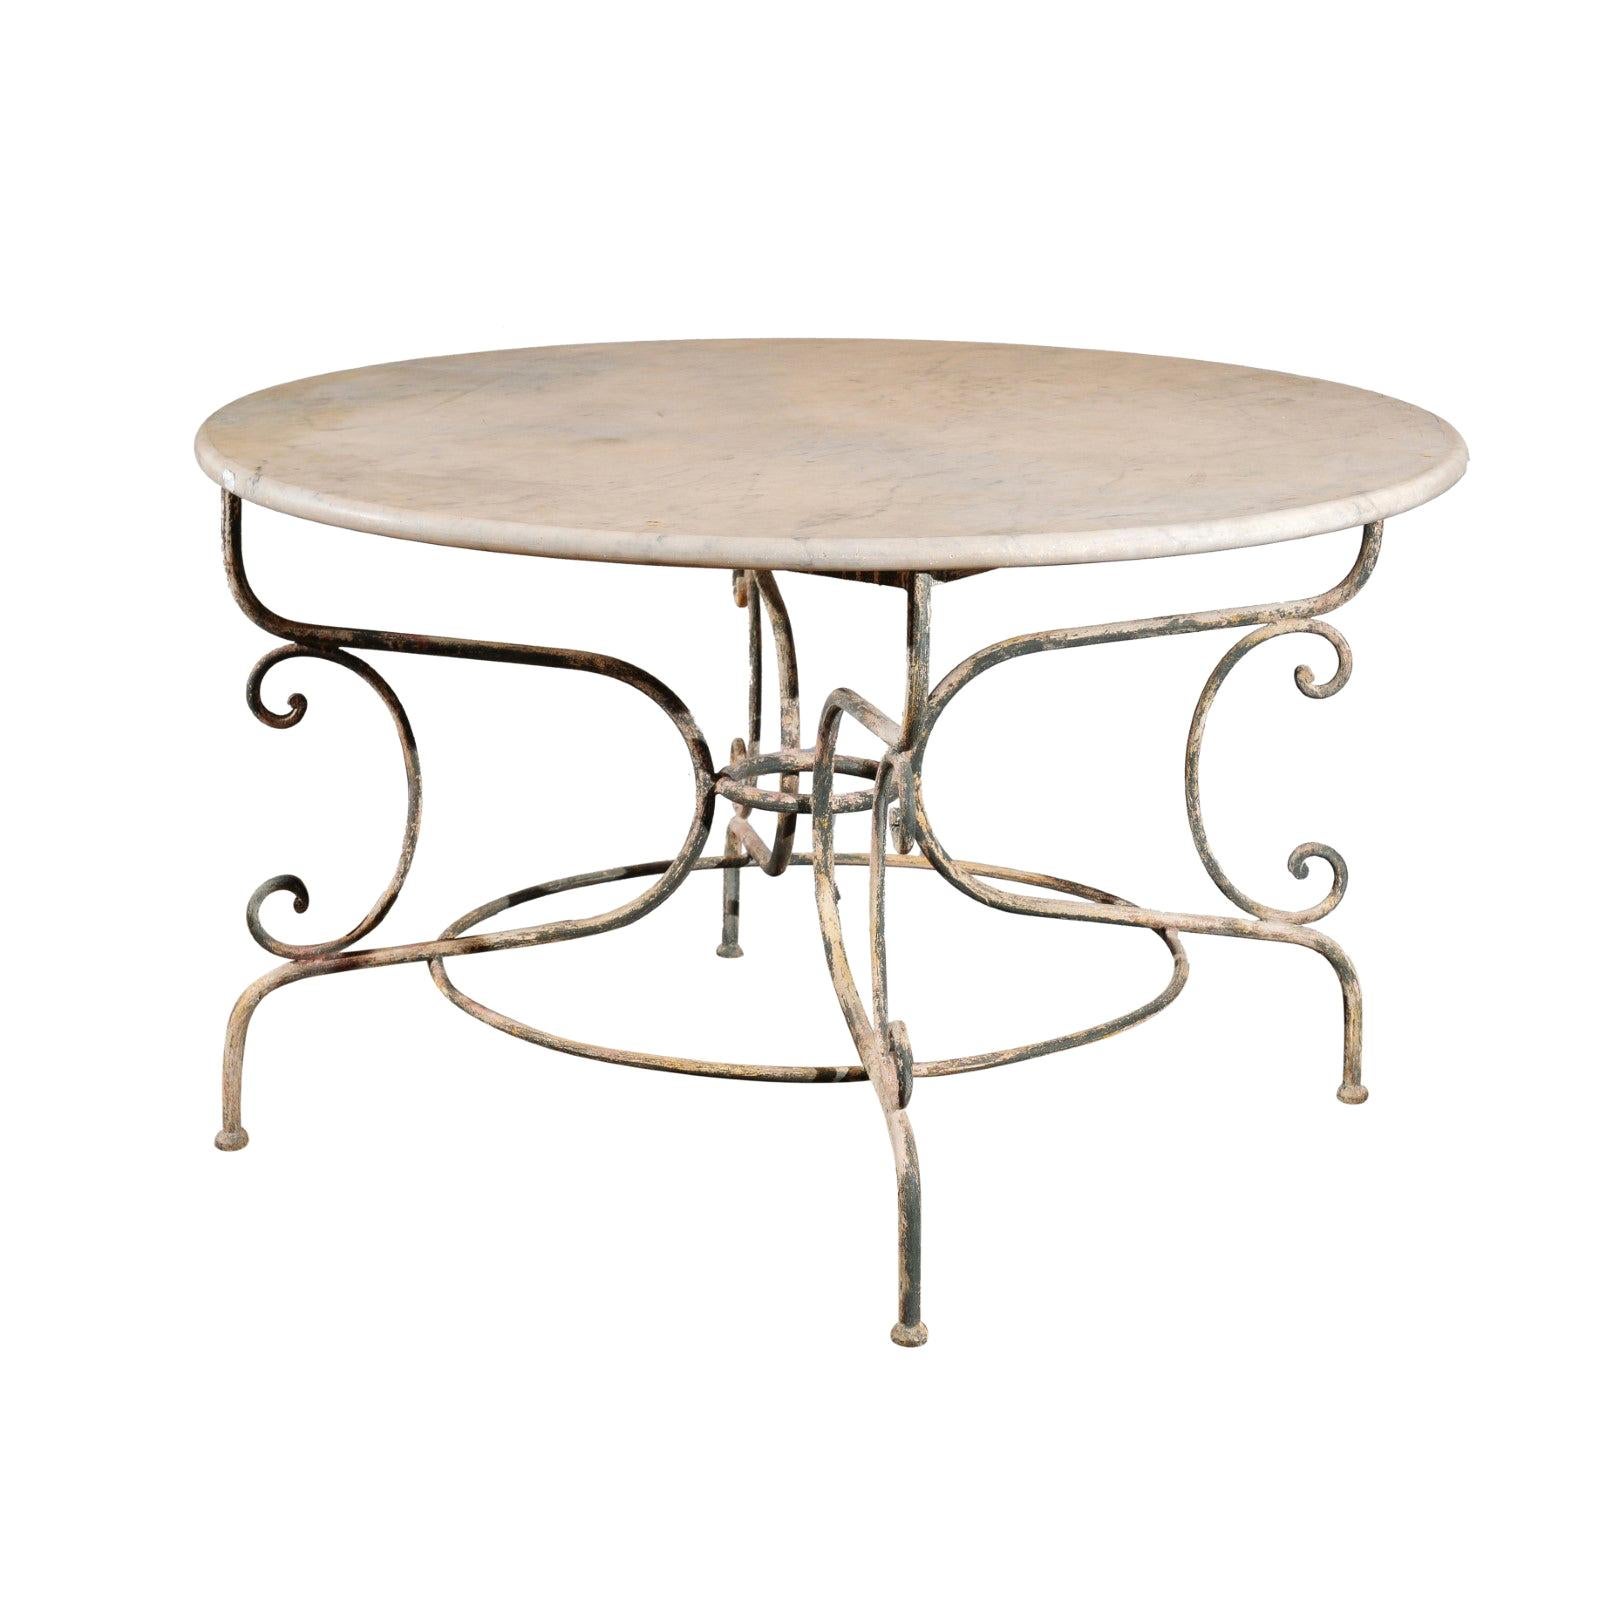 Vintage French Painted Iron Garden Table with Marble Top and Scrolled Base